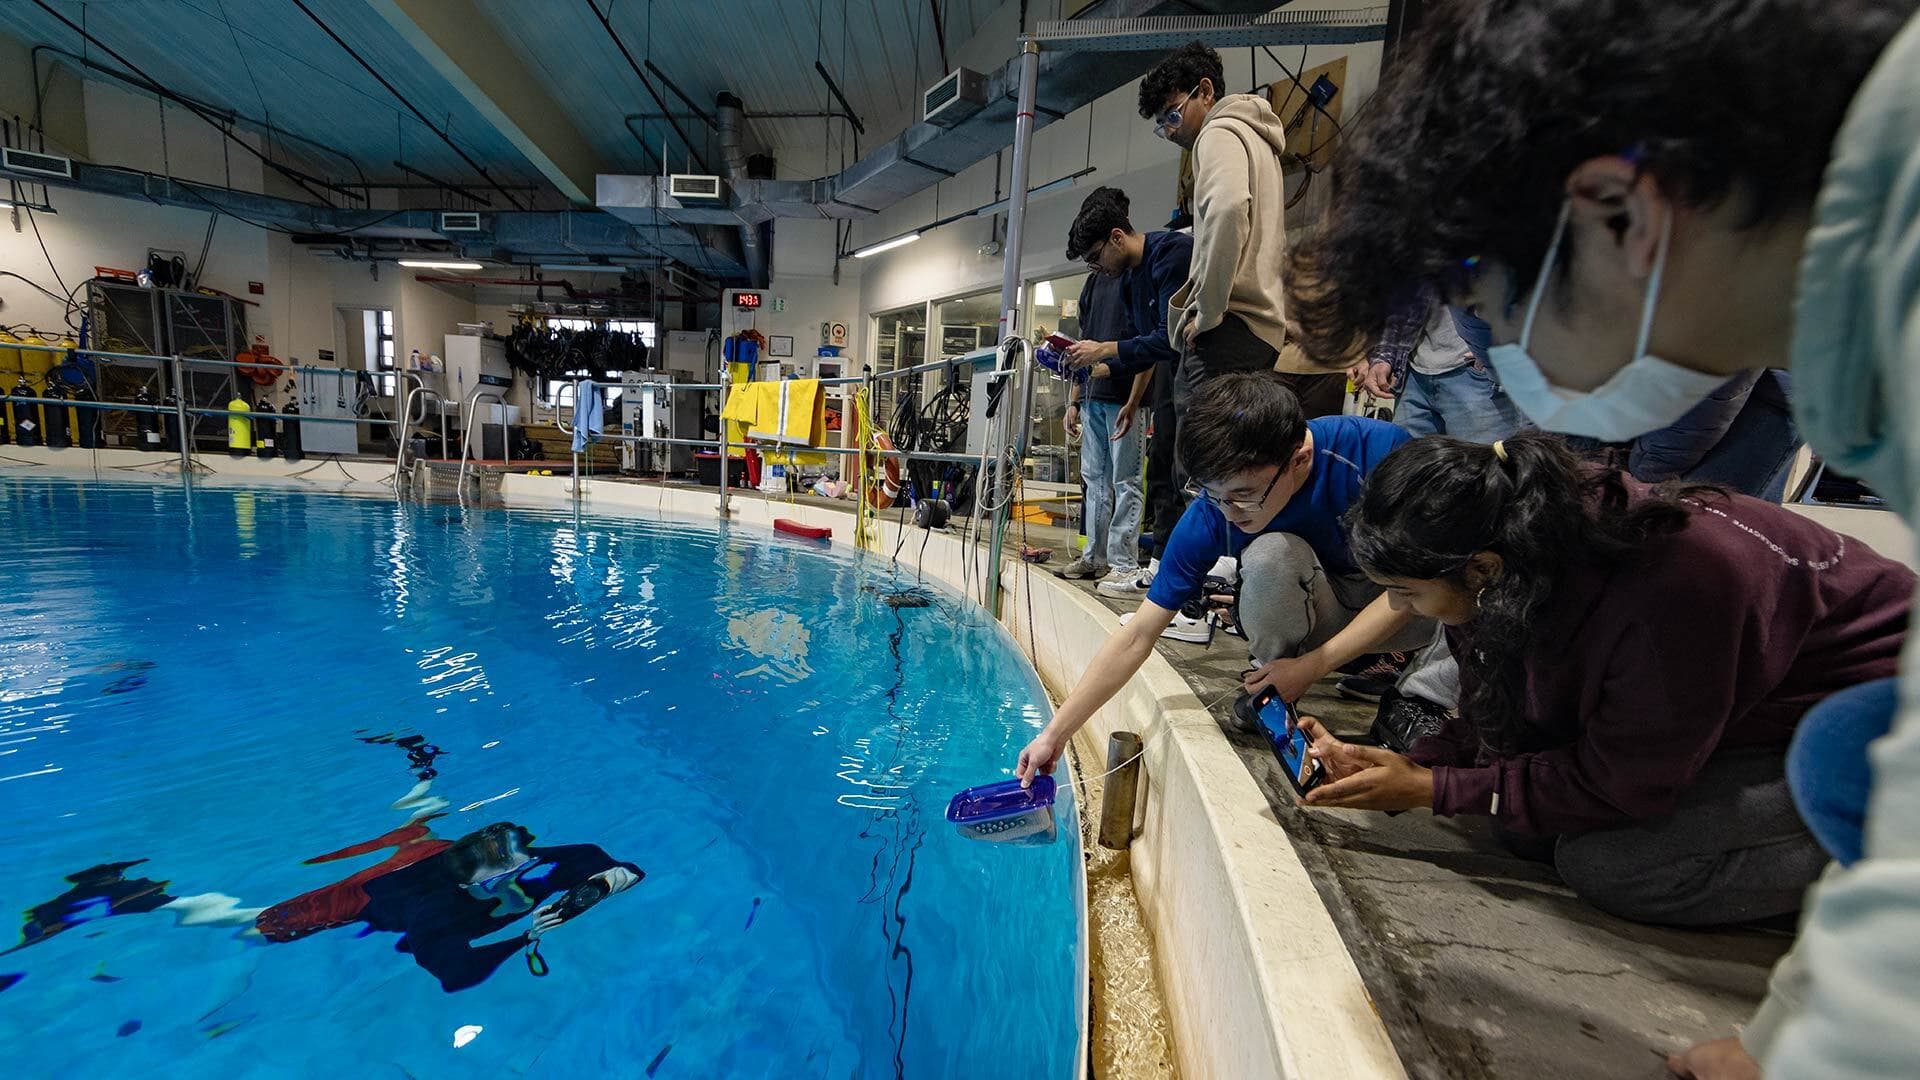 A person swims in a tank while students look on